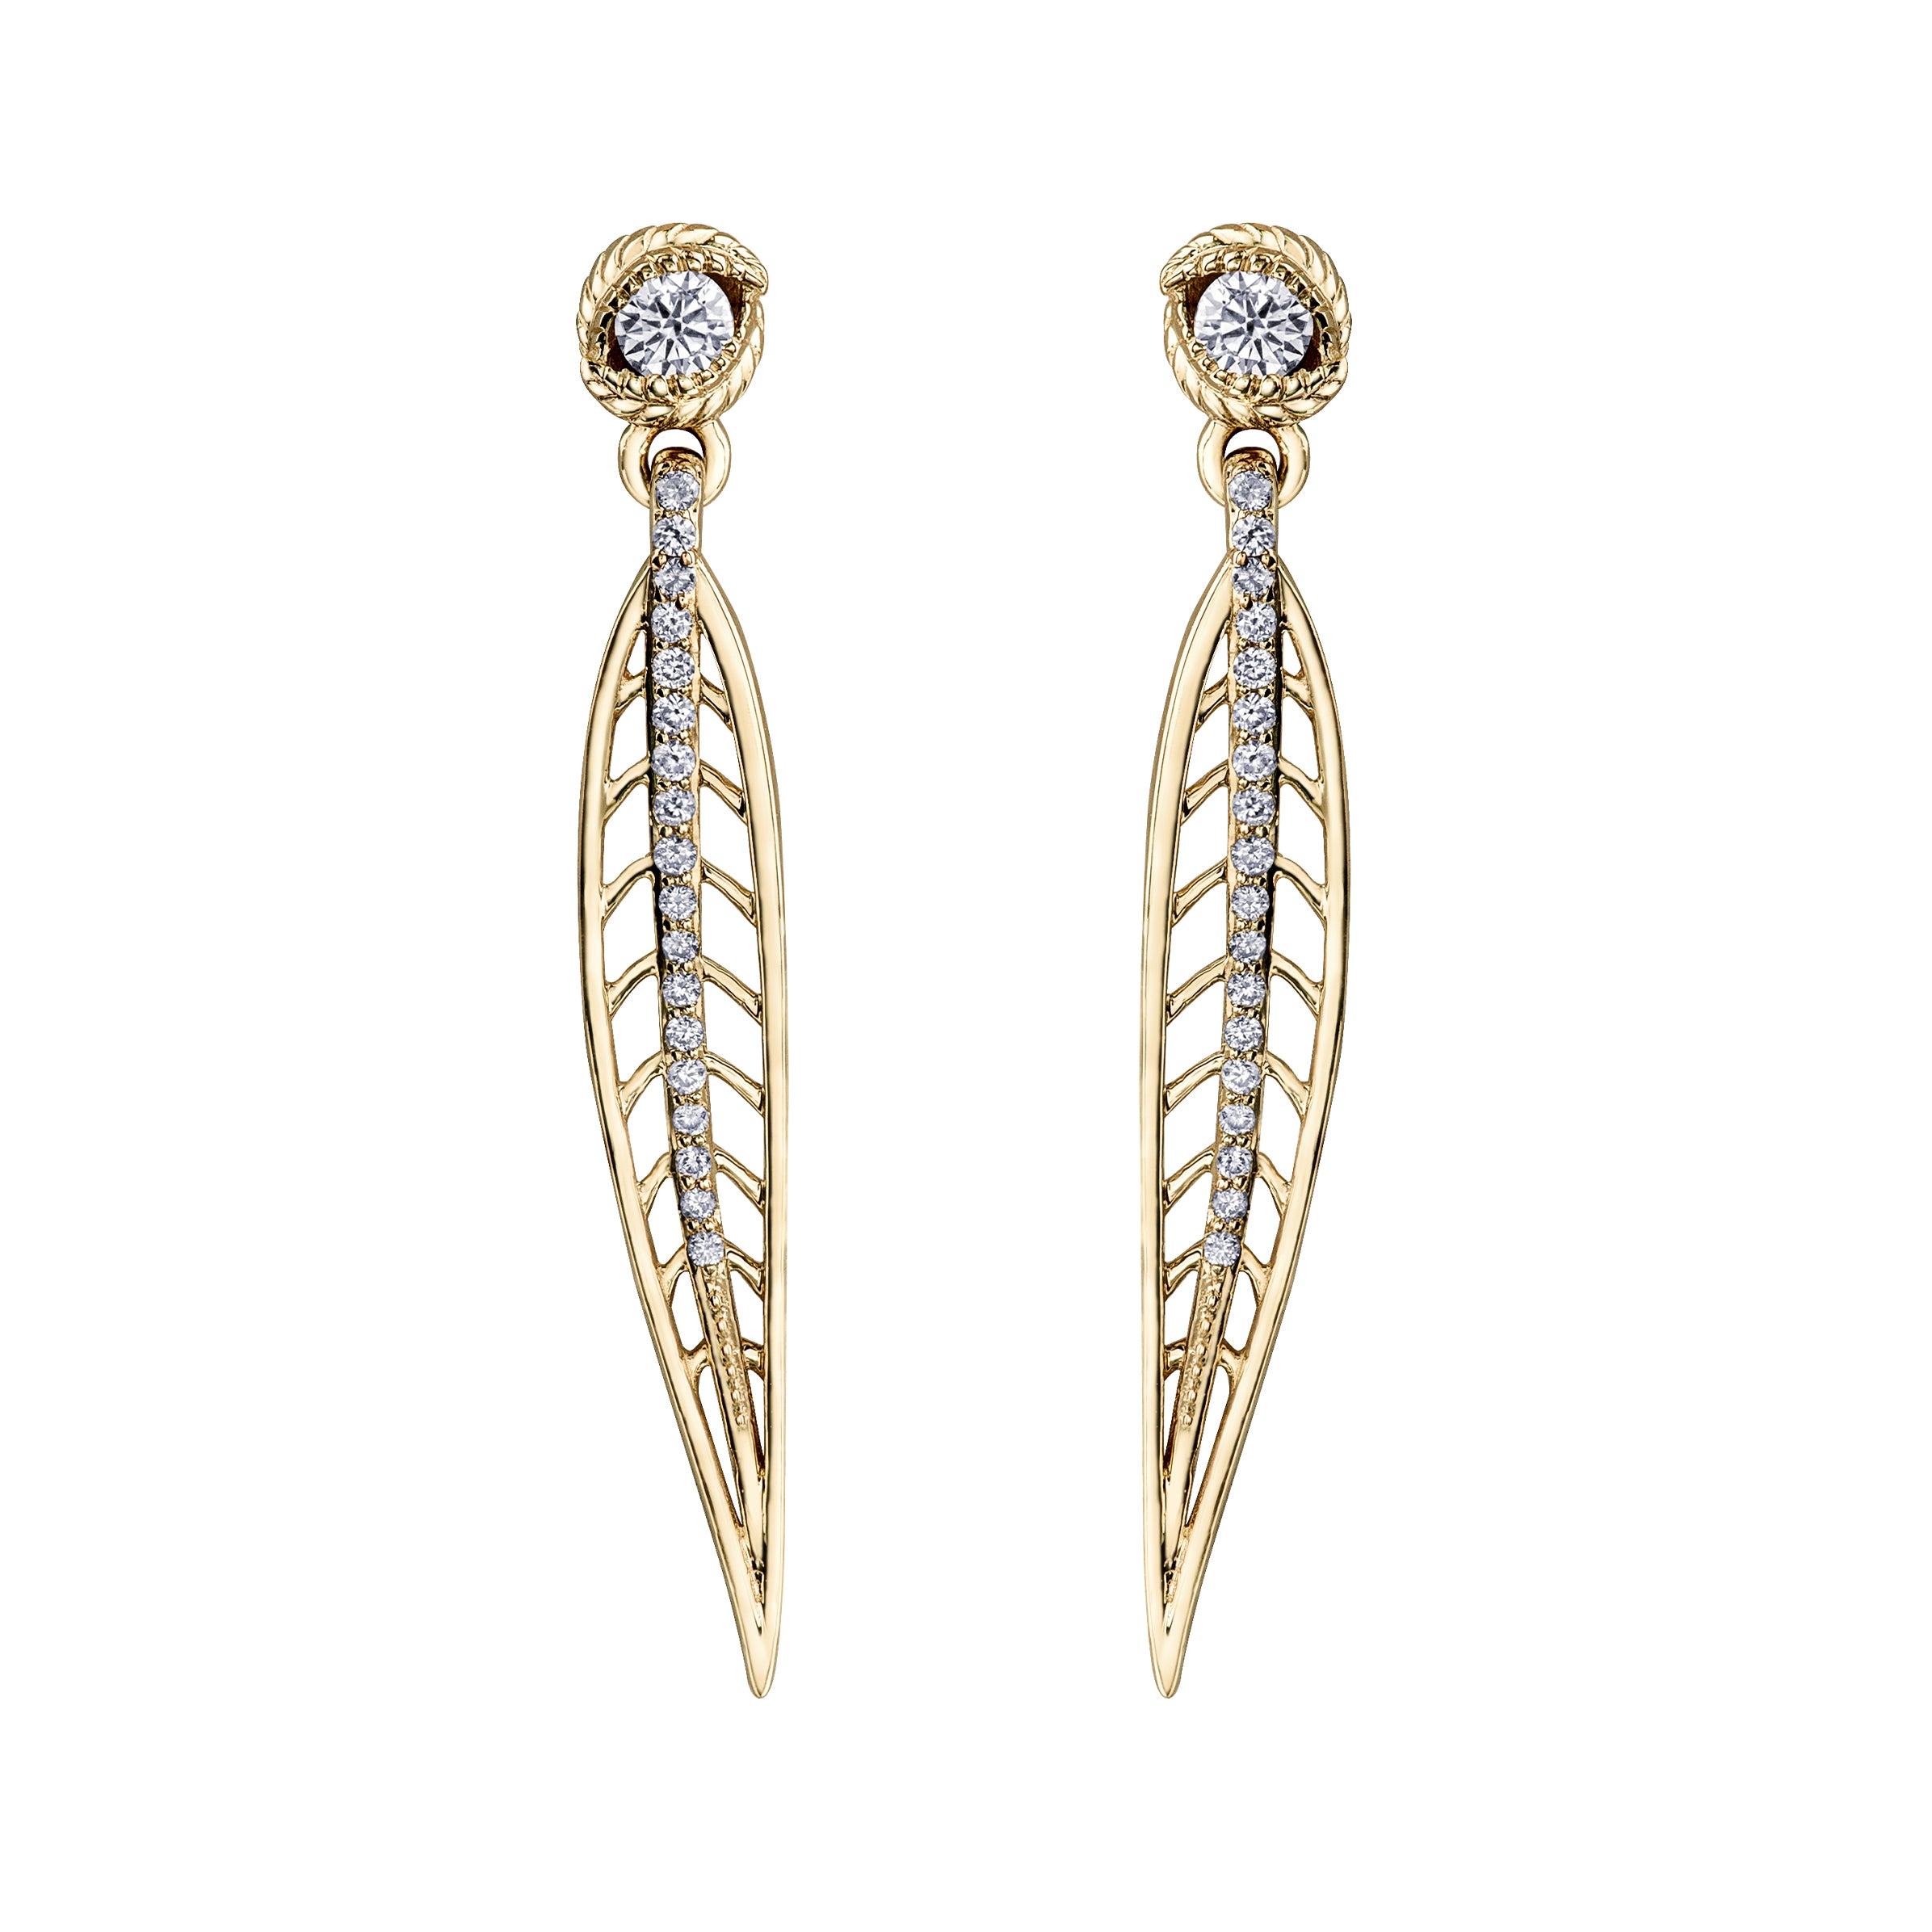 Crafted in 14KT yellow Canadian Certified Gold, these earrings each feature a willow tree leaf dangling from a stud set with a round brilliant-cut Canadian diamond.